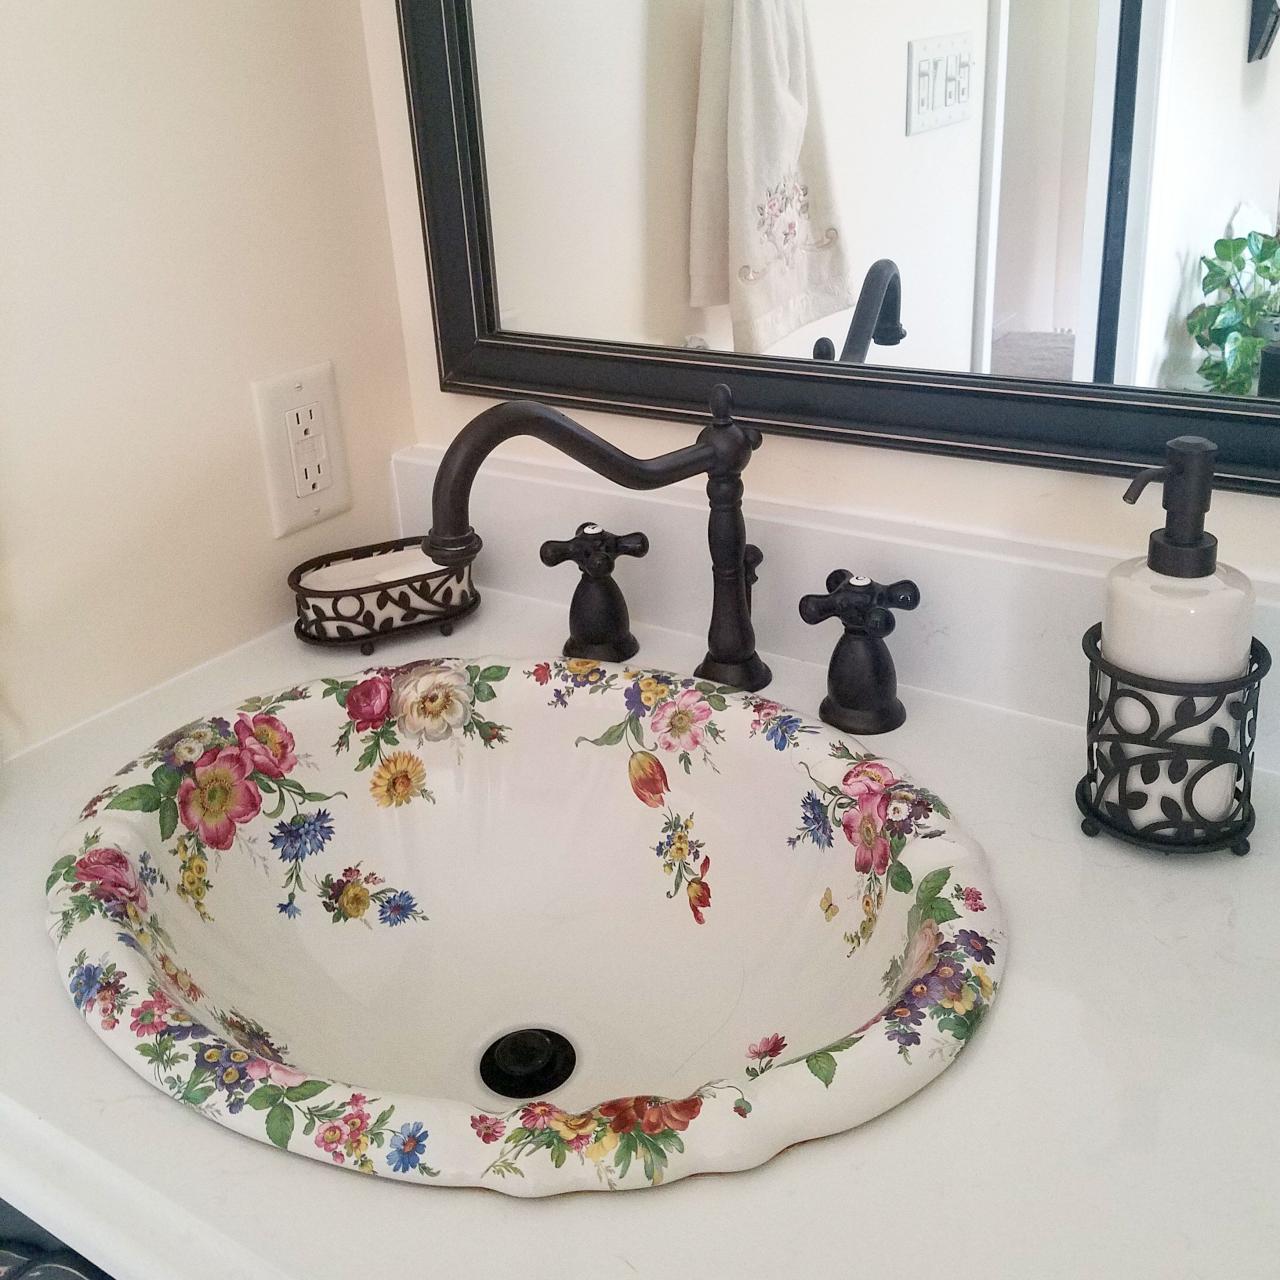 Scented Garden Fluted Dropin Sink in 2020 Small bathroom decor, Home